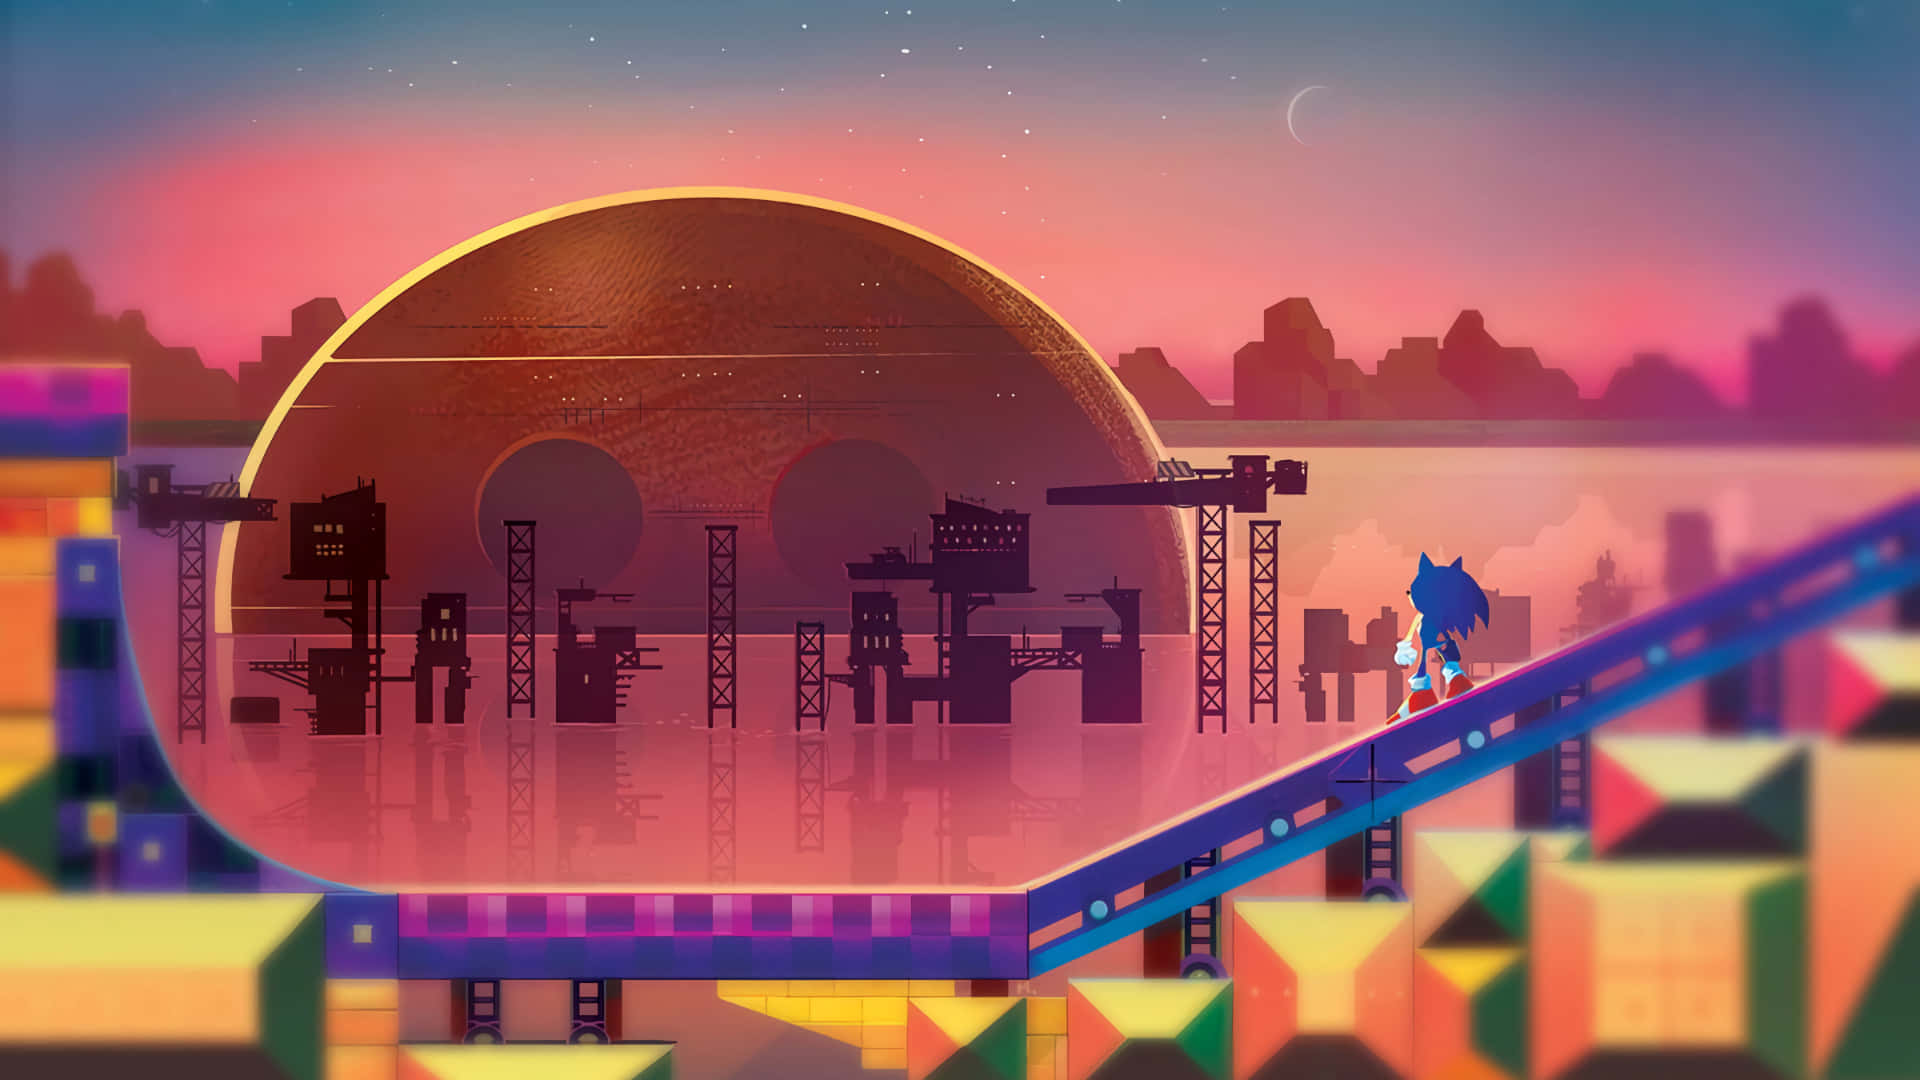 Sonic the Hedgehog dashing through the vibrant and technologically advanced Launch Base Zone. Wallpaper